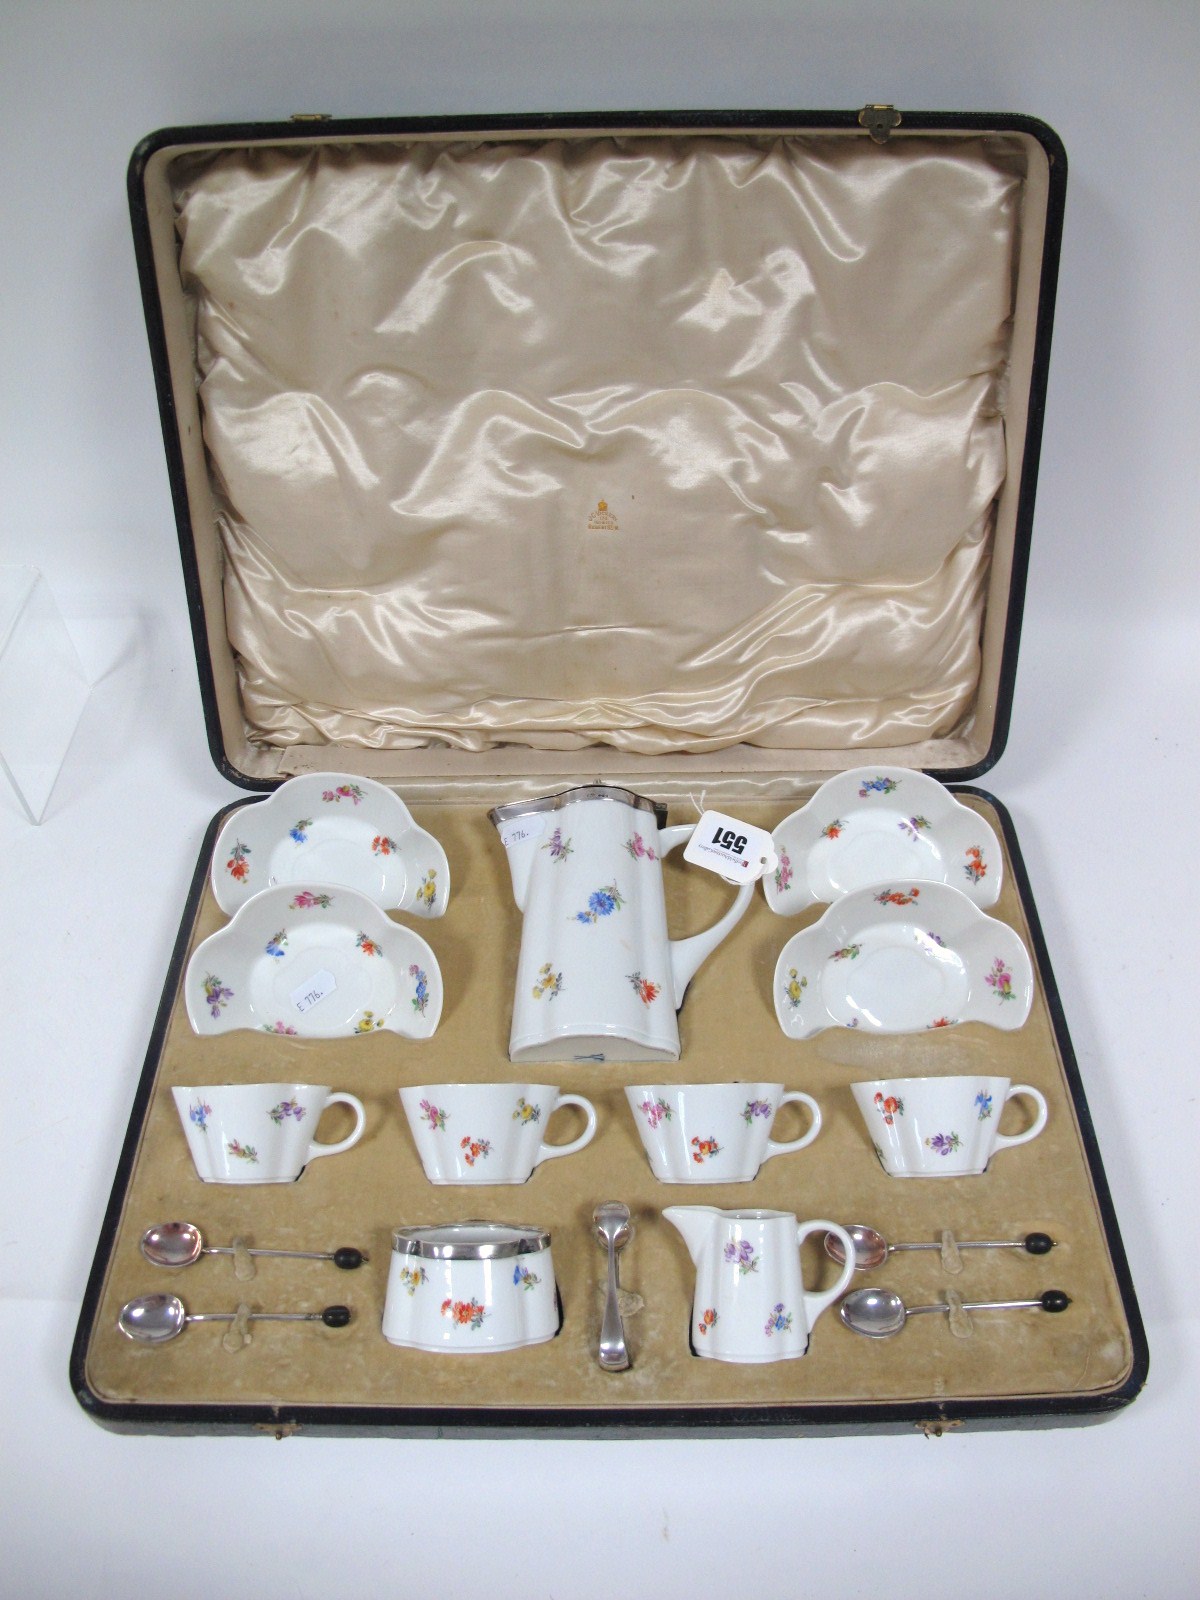 An Early XX Century Meissen Porcelain Coffee Service, polychrome painted with flowers in the